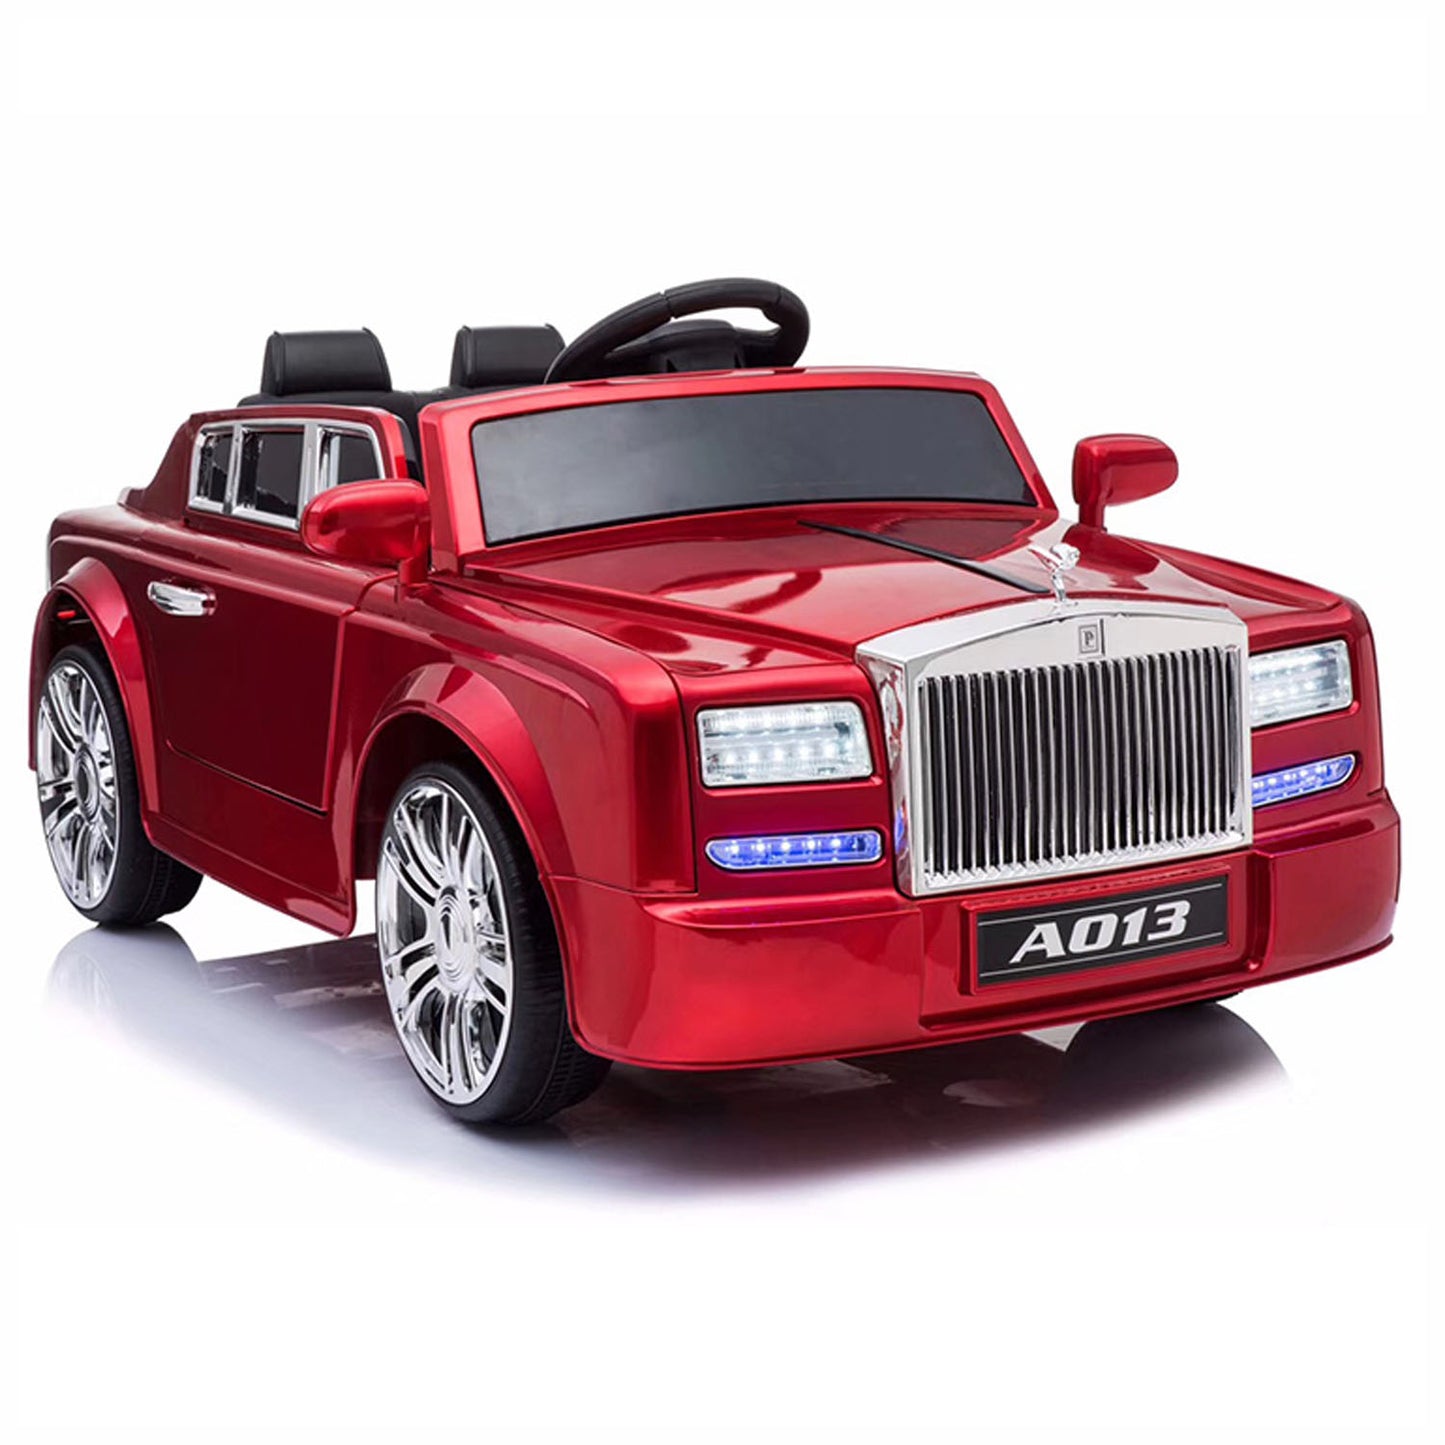 Rolls Royce Toy Car Rechargeable Battery Operated Ride on car for KidsToddlers with Remote Control Electric Motor Car Suitable Babies for Boys & Girls (Black)